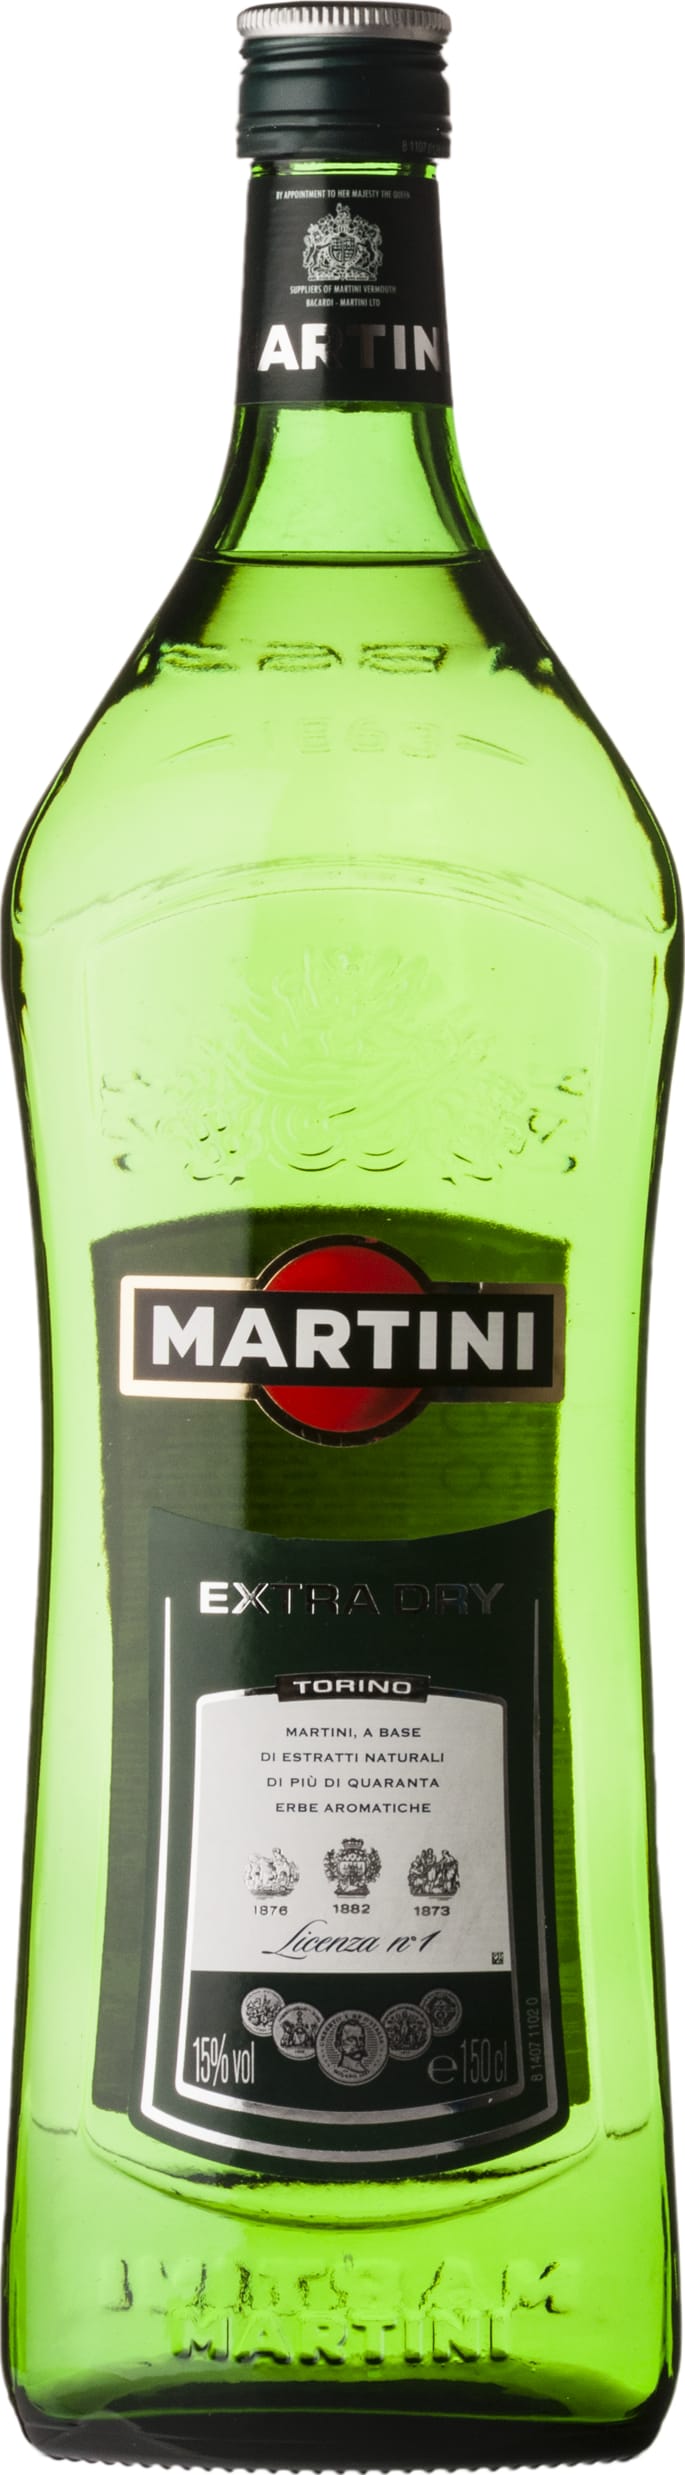 Martini Dry Vermouth 75cl NV - Buy Martini Wines from GREAT WINES DIRECT wine shop